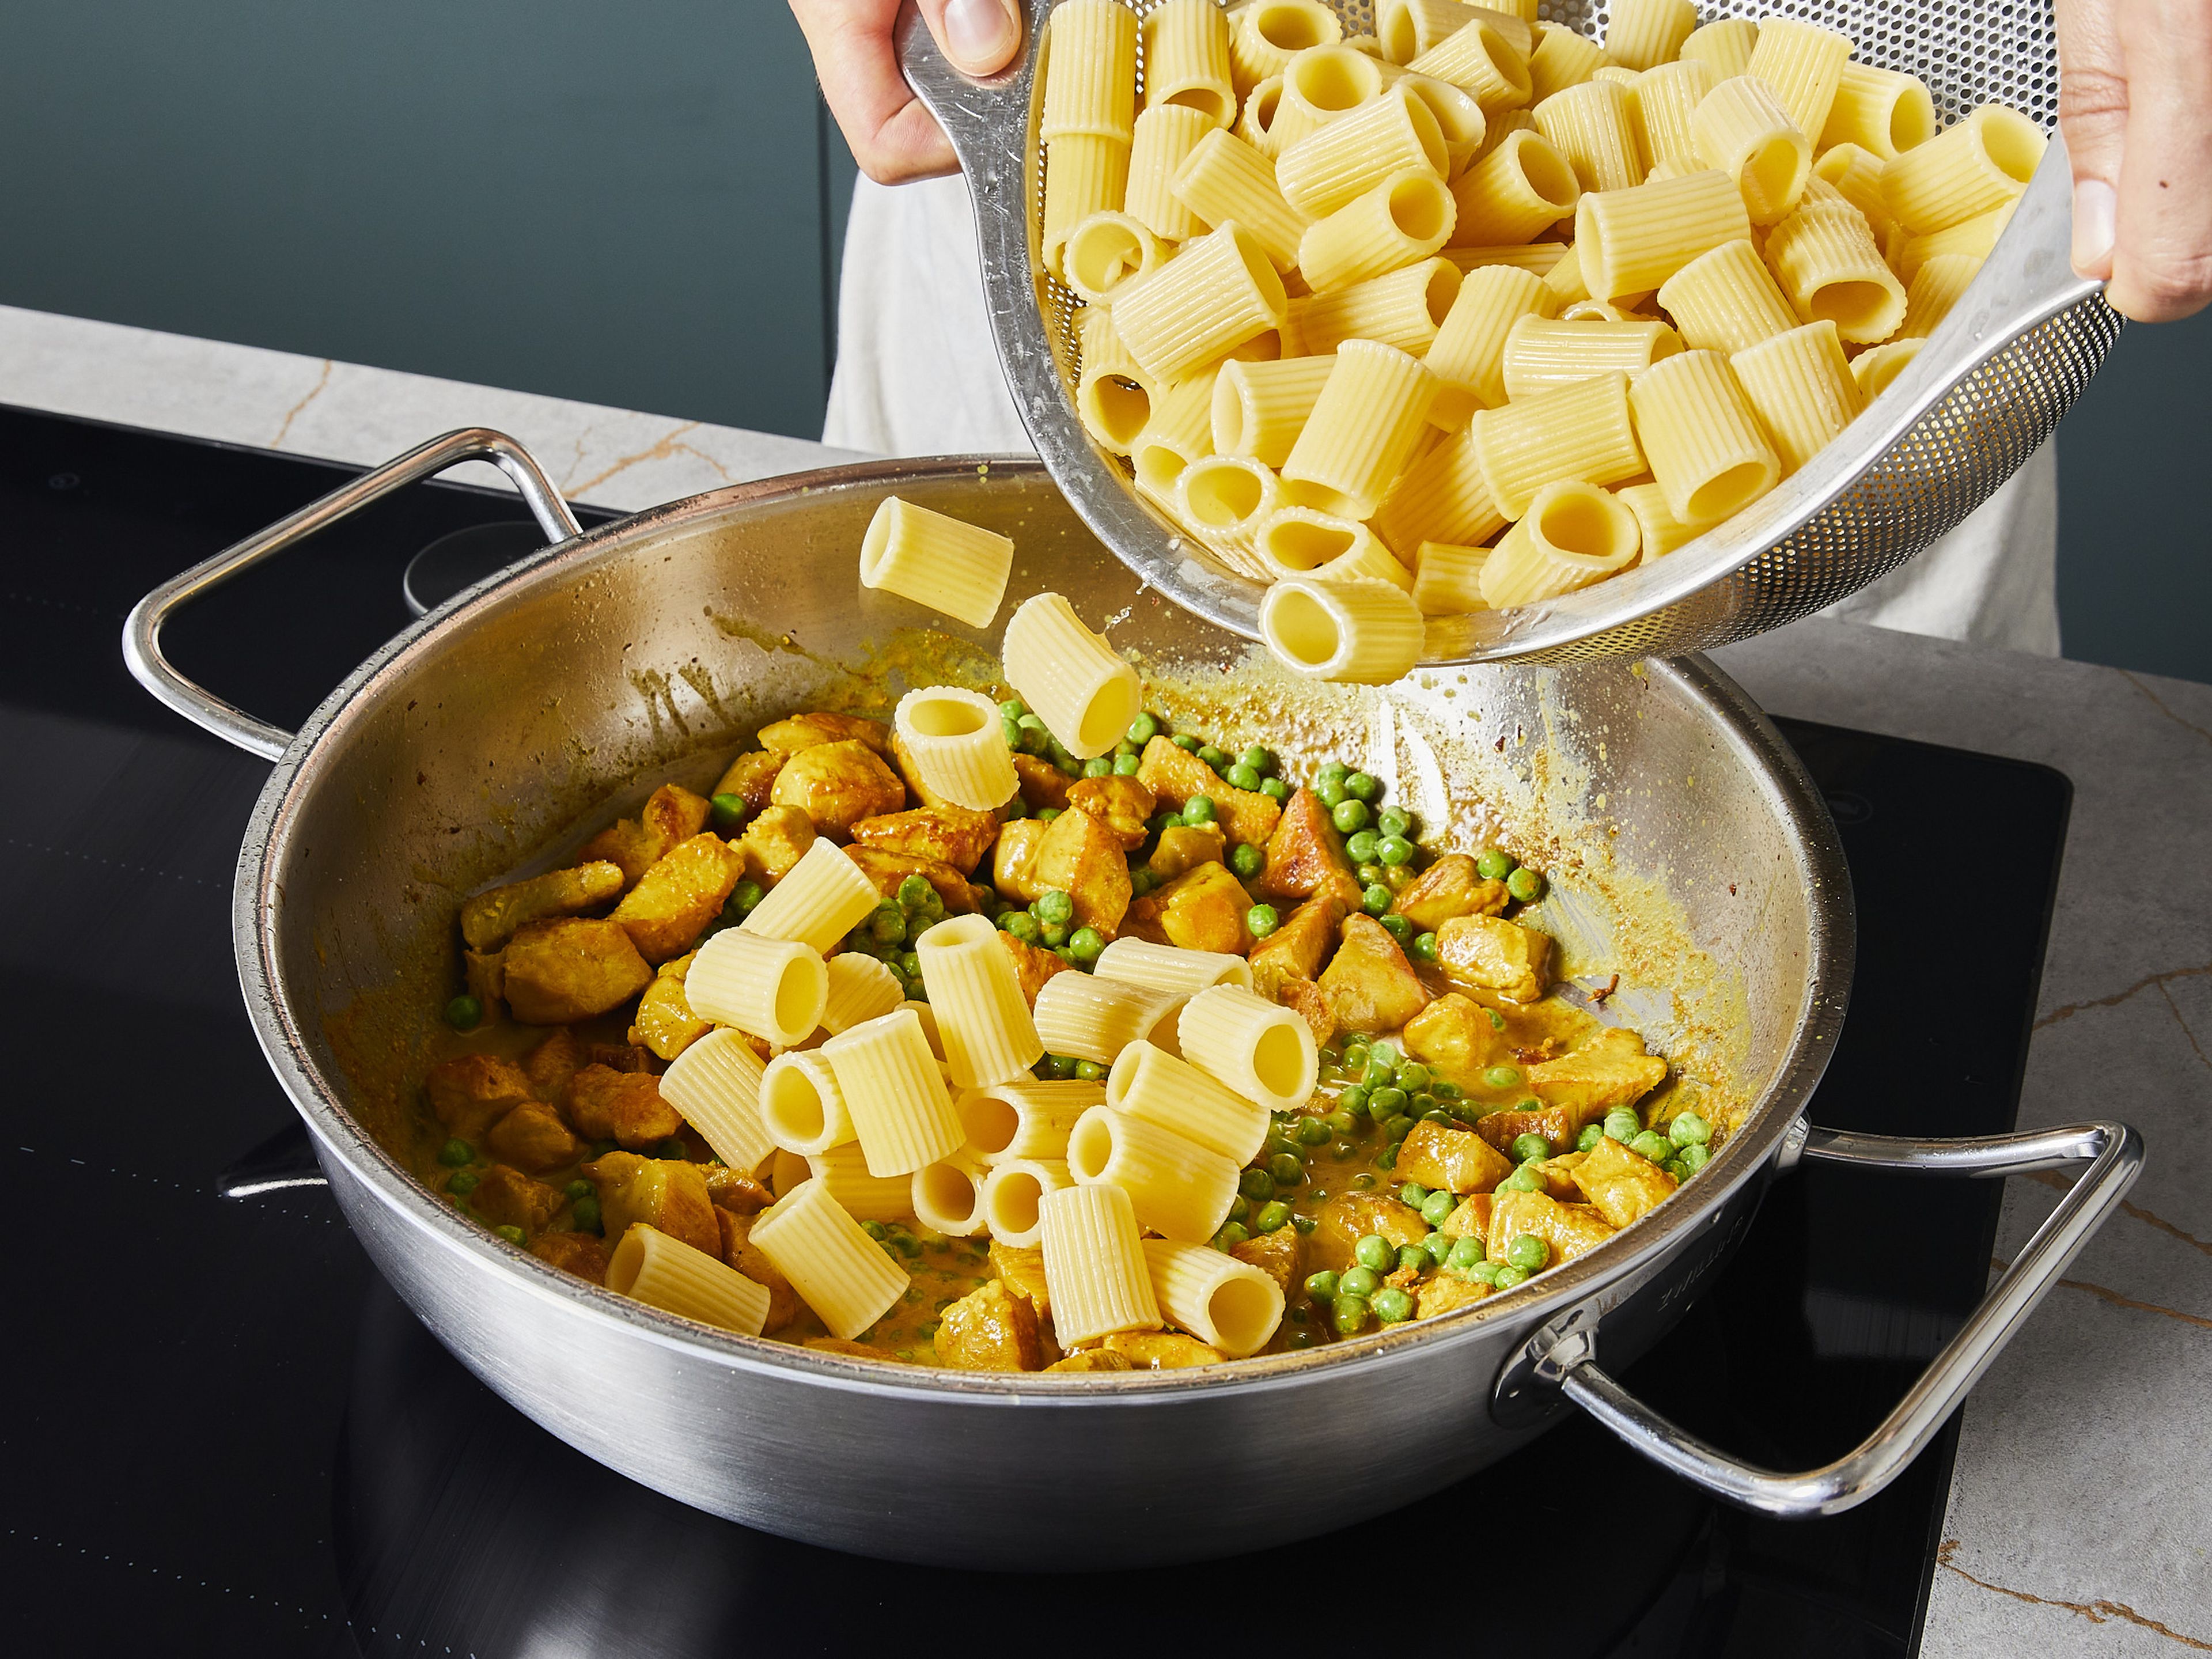 Add cooked pasta and mix thoroughly until everything looks glossy and creamy. Serve the finished pasta on deep plates.